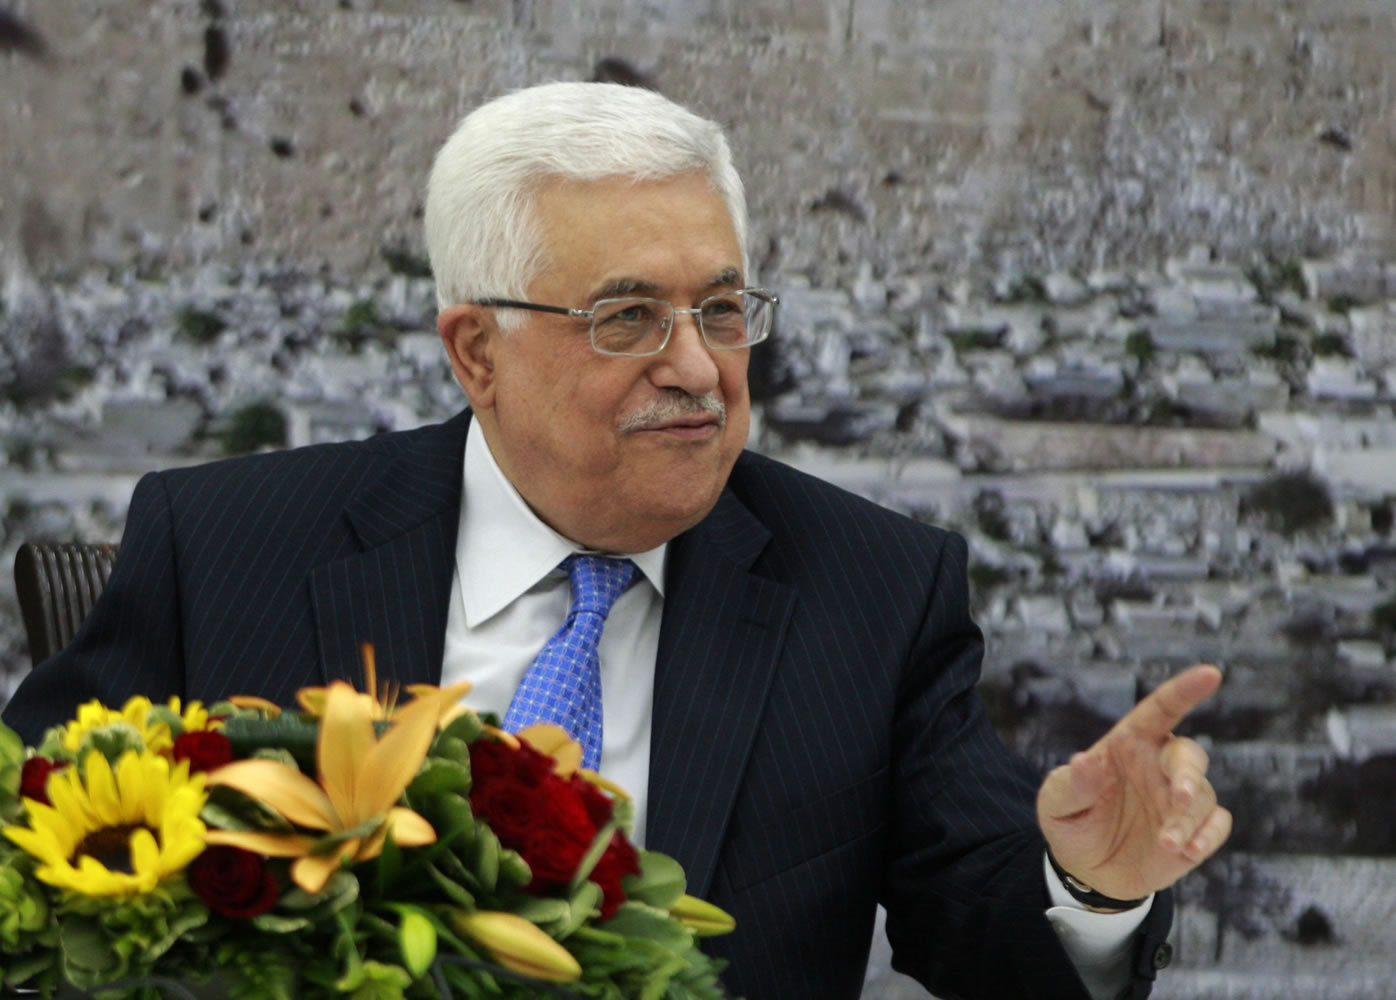 Palestinian President Mahmoud Abbas attends a meeting of the Palestinian leadership in the West Bank city of Ramallah on Thursday.